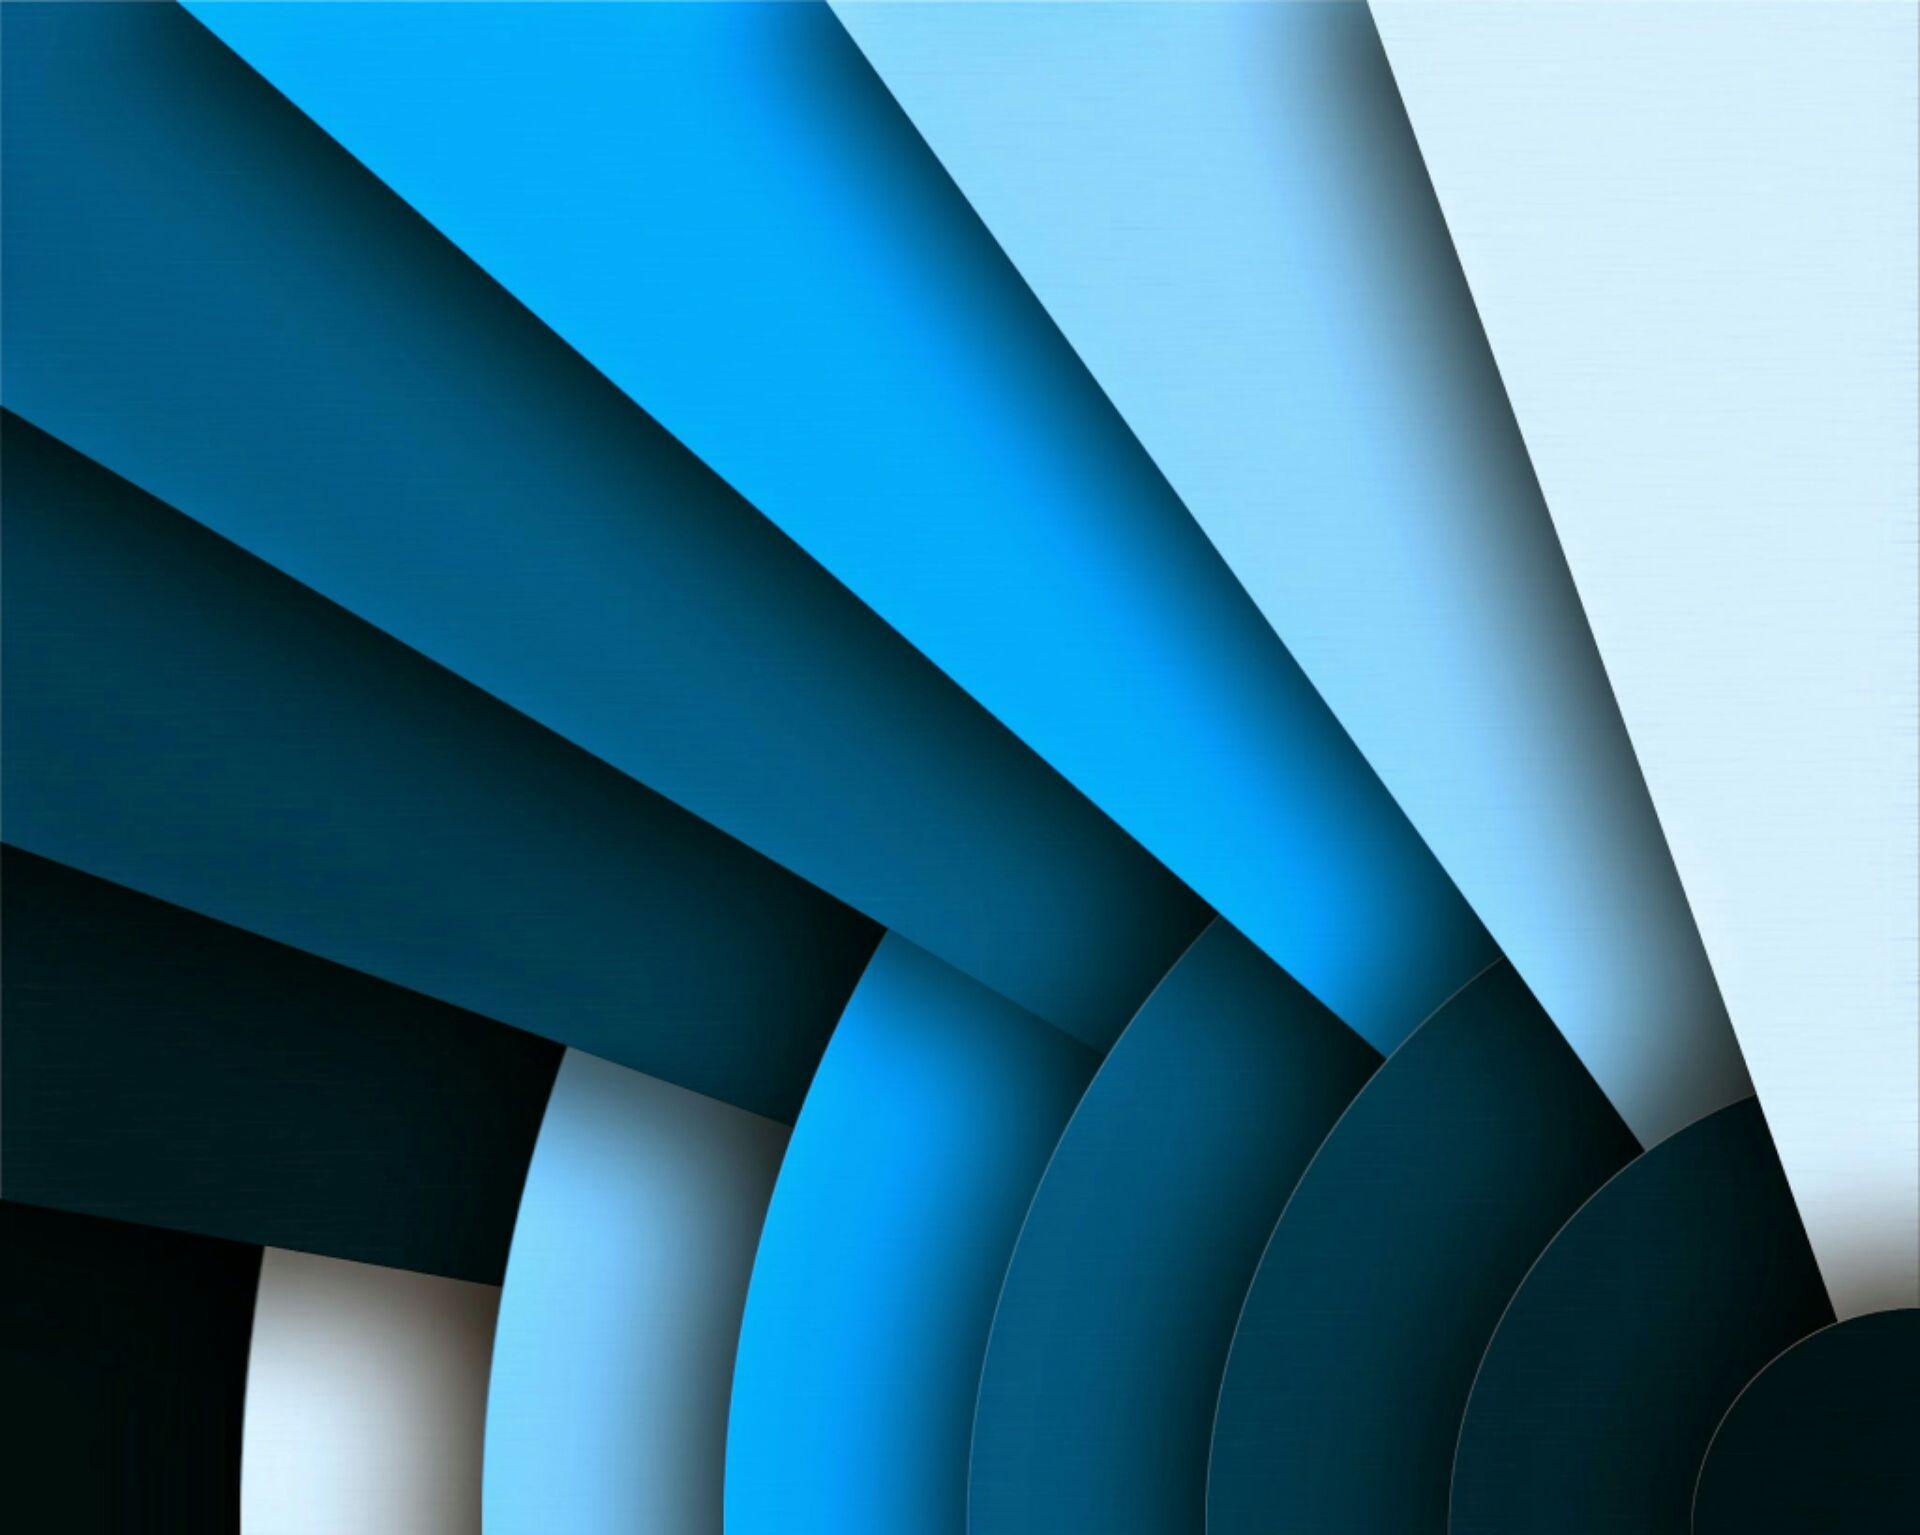 Check these 500 Material design wallpaper for home screen & lock